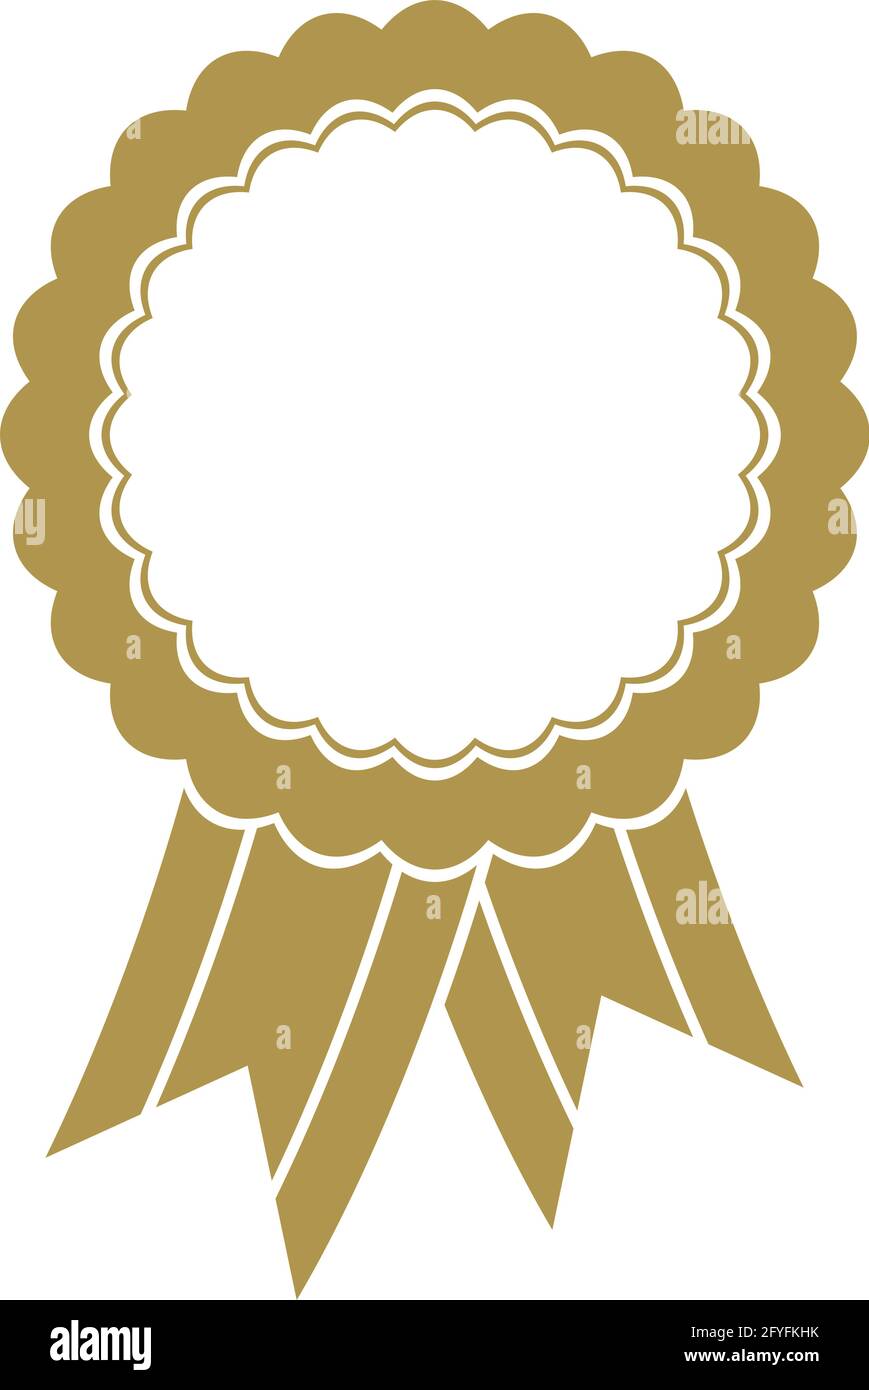 Flat Award or Sale Ribbon vector in gold on isolated white background ...